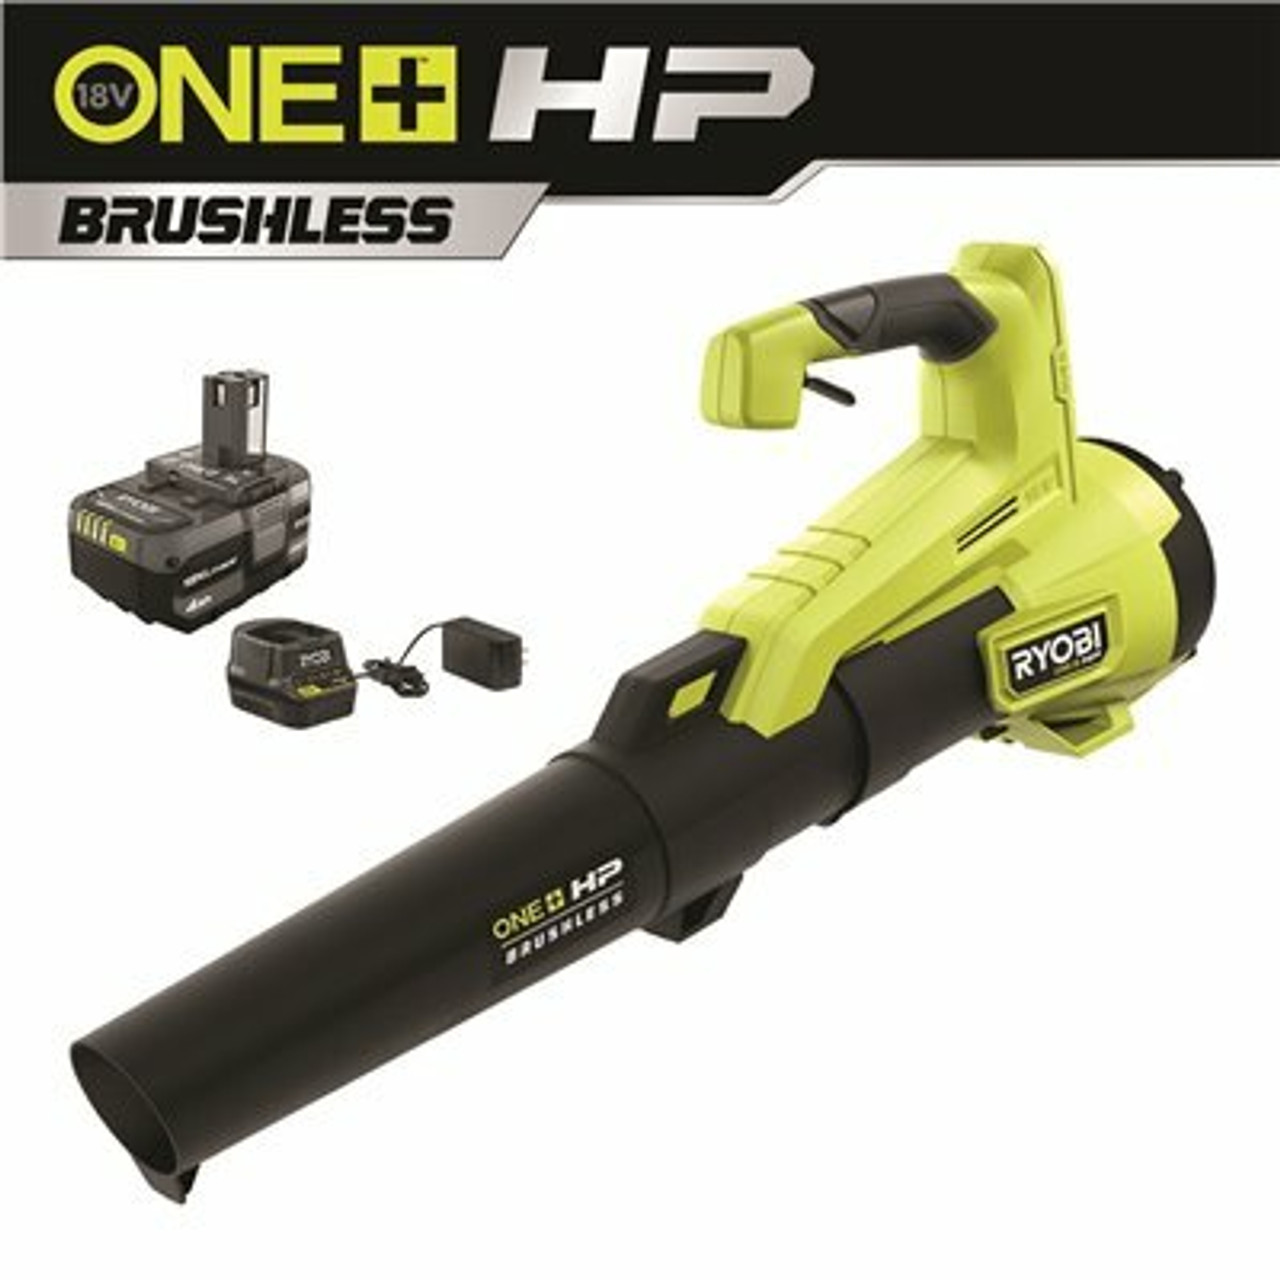 Ryobi One+ Hp 18V Brushless 110 Mph 350 Cfm Cordless Variable-Speed Jet Fan Leaf Blower W/ 4.0 Ah Battery And Charger